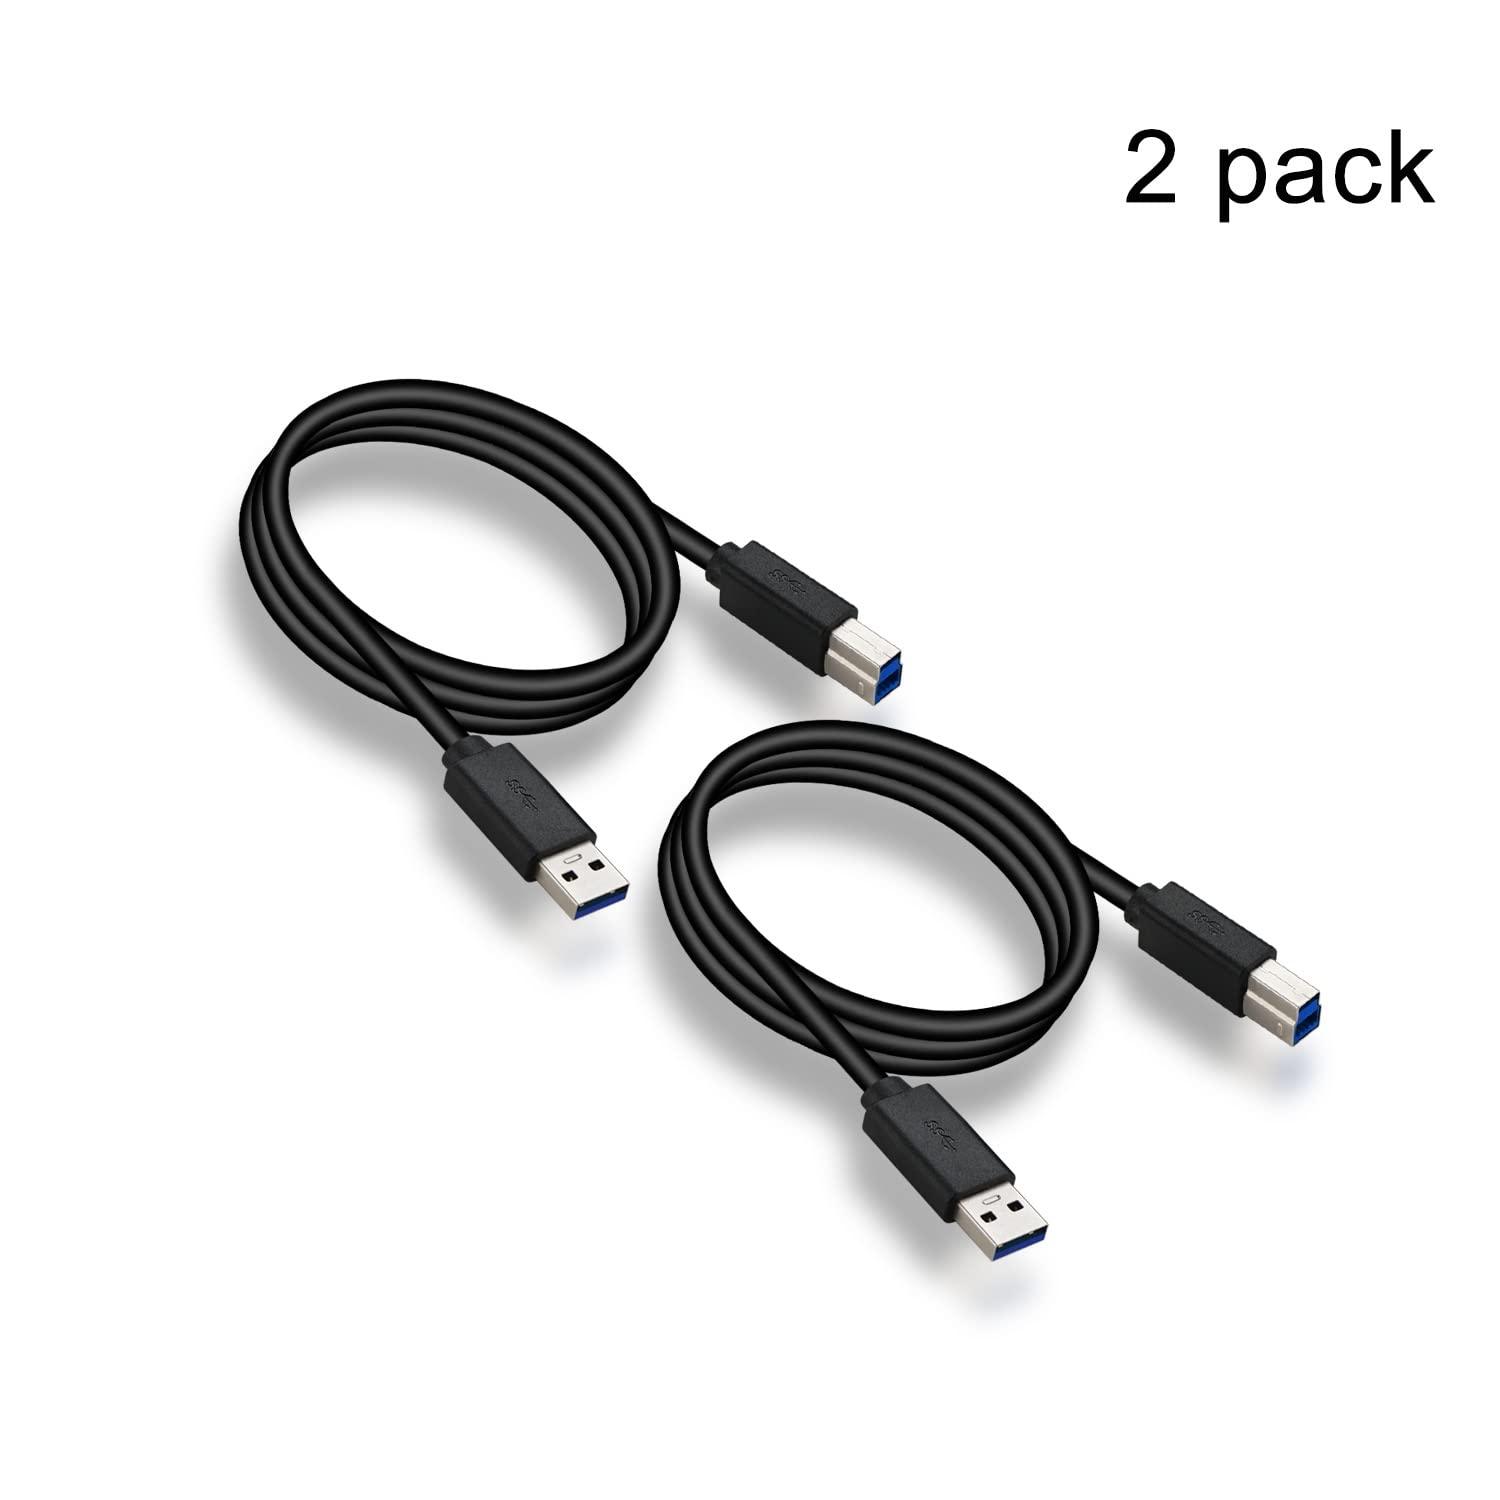 2 Pack USB 3.0 Cable A Male to B Male 4.92 ft, for Scanner, Printers, Desktop External Hard Drivers and More(4.92ft) - CKL KVM Switches